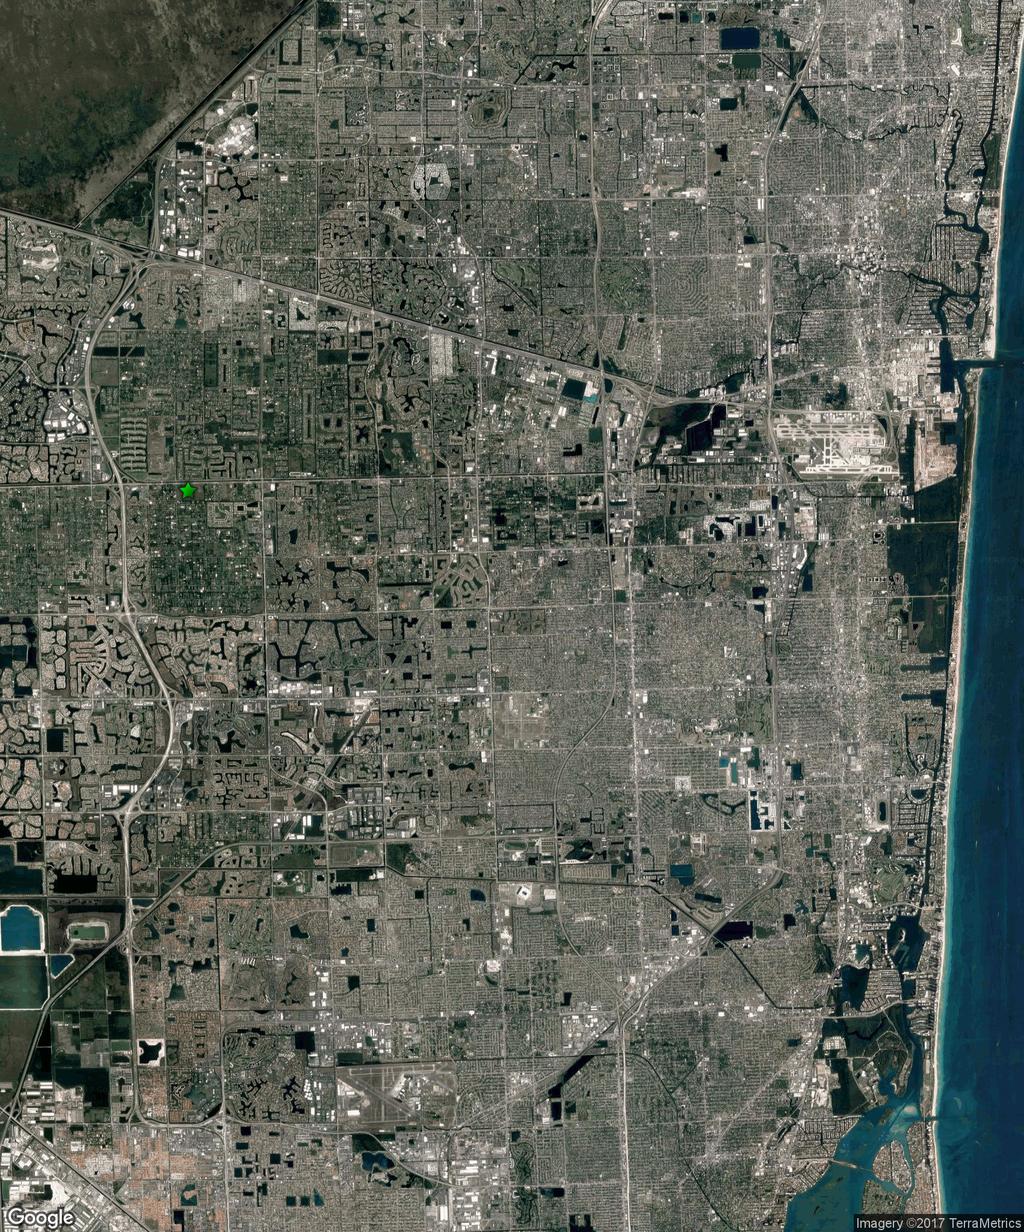 FOR SALE AERIAL MAP SUNRISE FLORIDA TURNPIKE PLANTATION DAVIE FORT LAUDERDALE FLL AIRPORT SOUTHWEST RANCHES PEMBROKE PINES CONTACT US CHRISTOPHER WOOD +1 954 745 5852 christopher.wood@cbre.